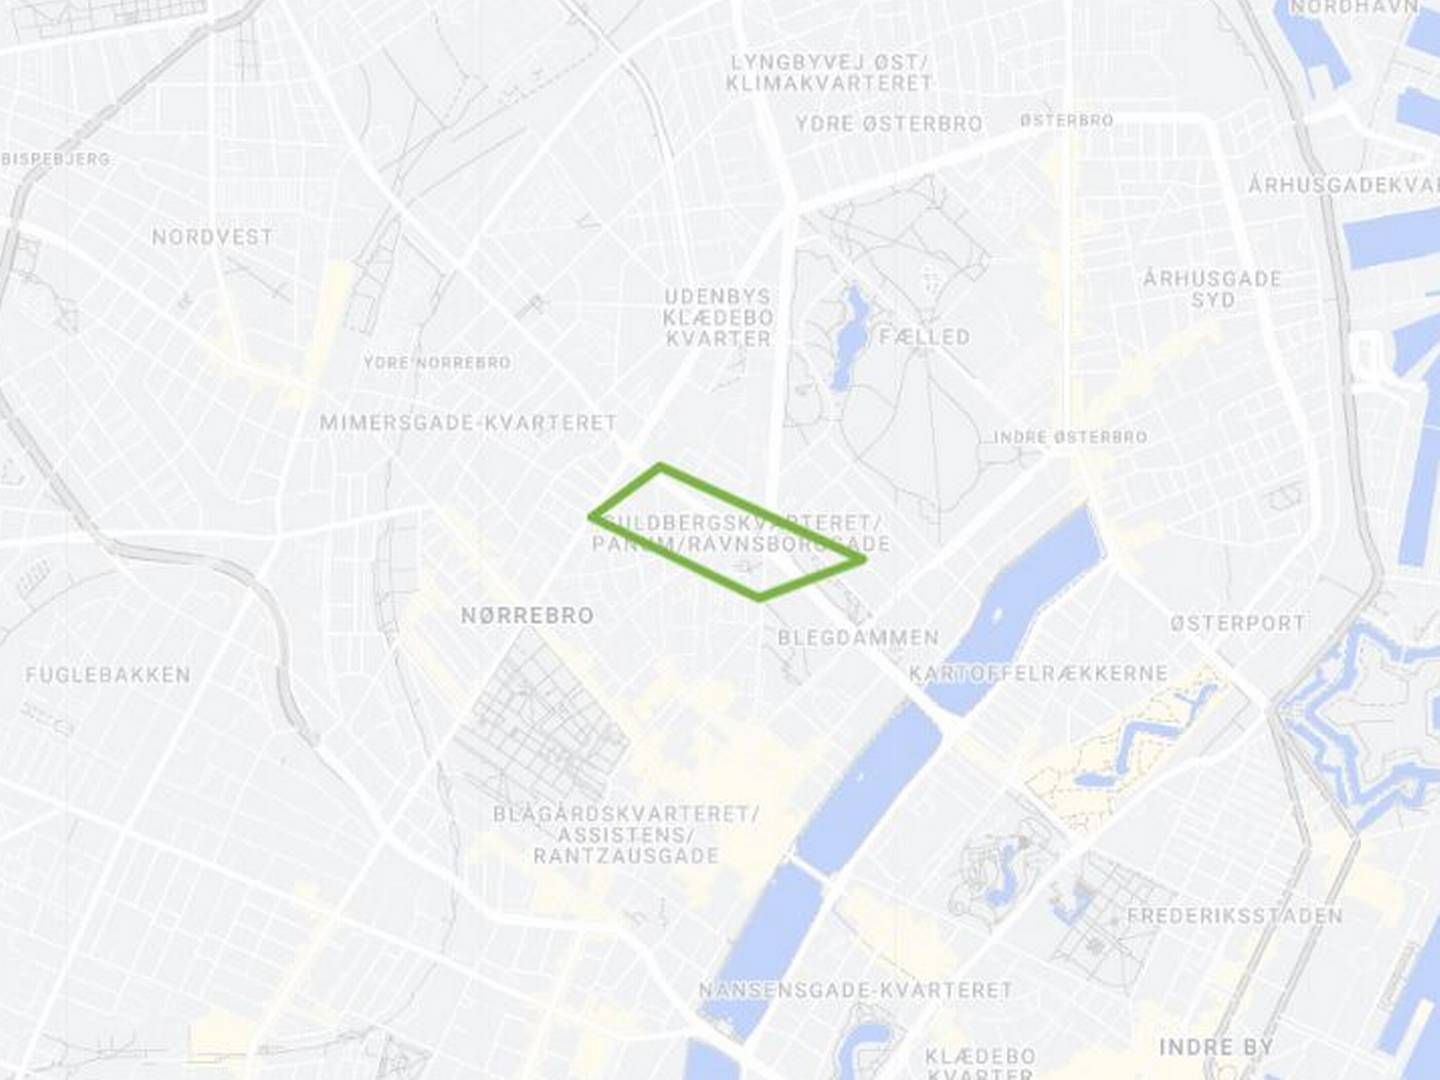 This area in Copenhagen has been identified as the site for the Innovation District.